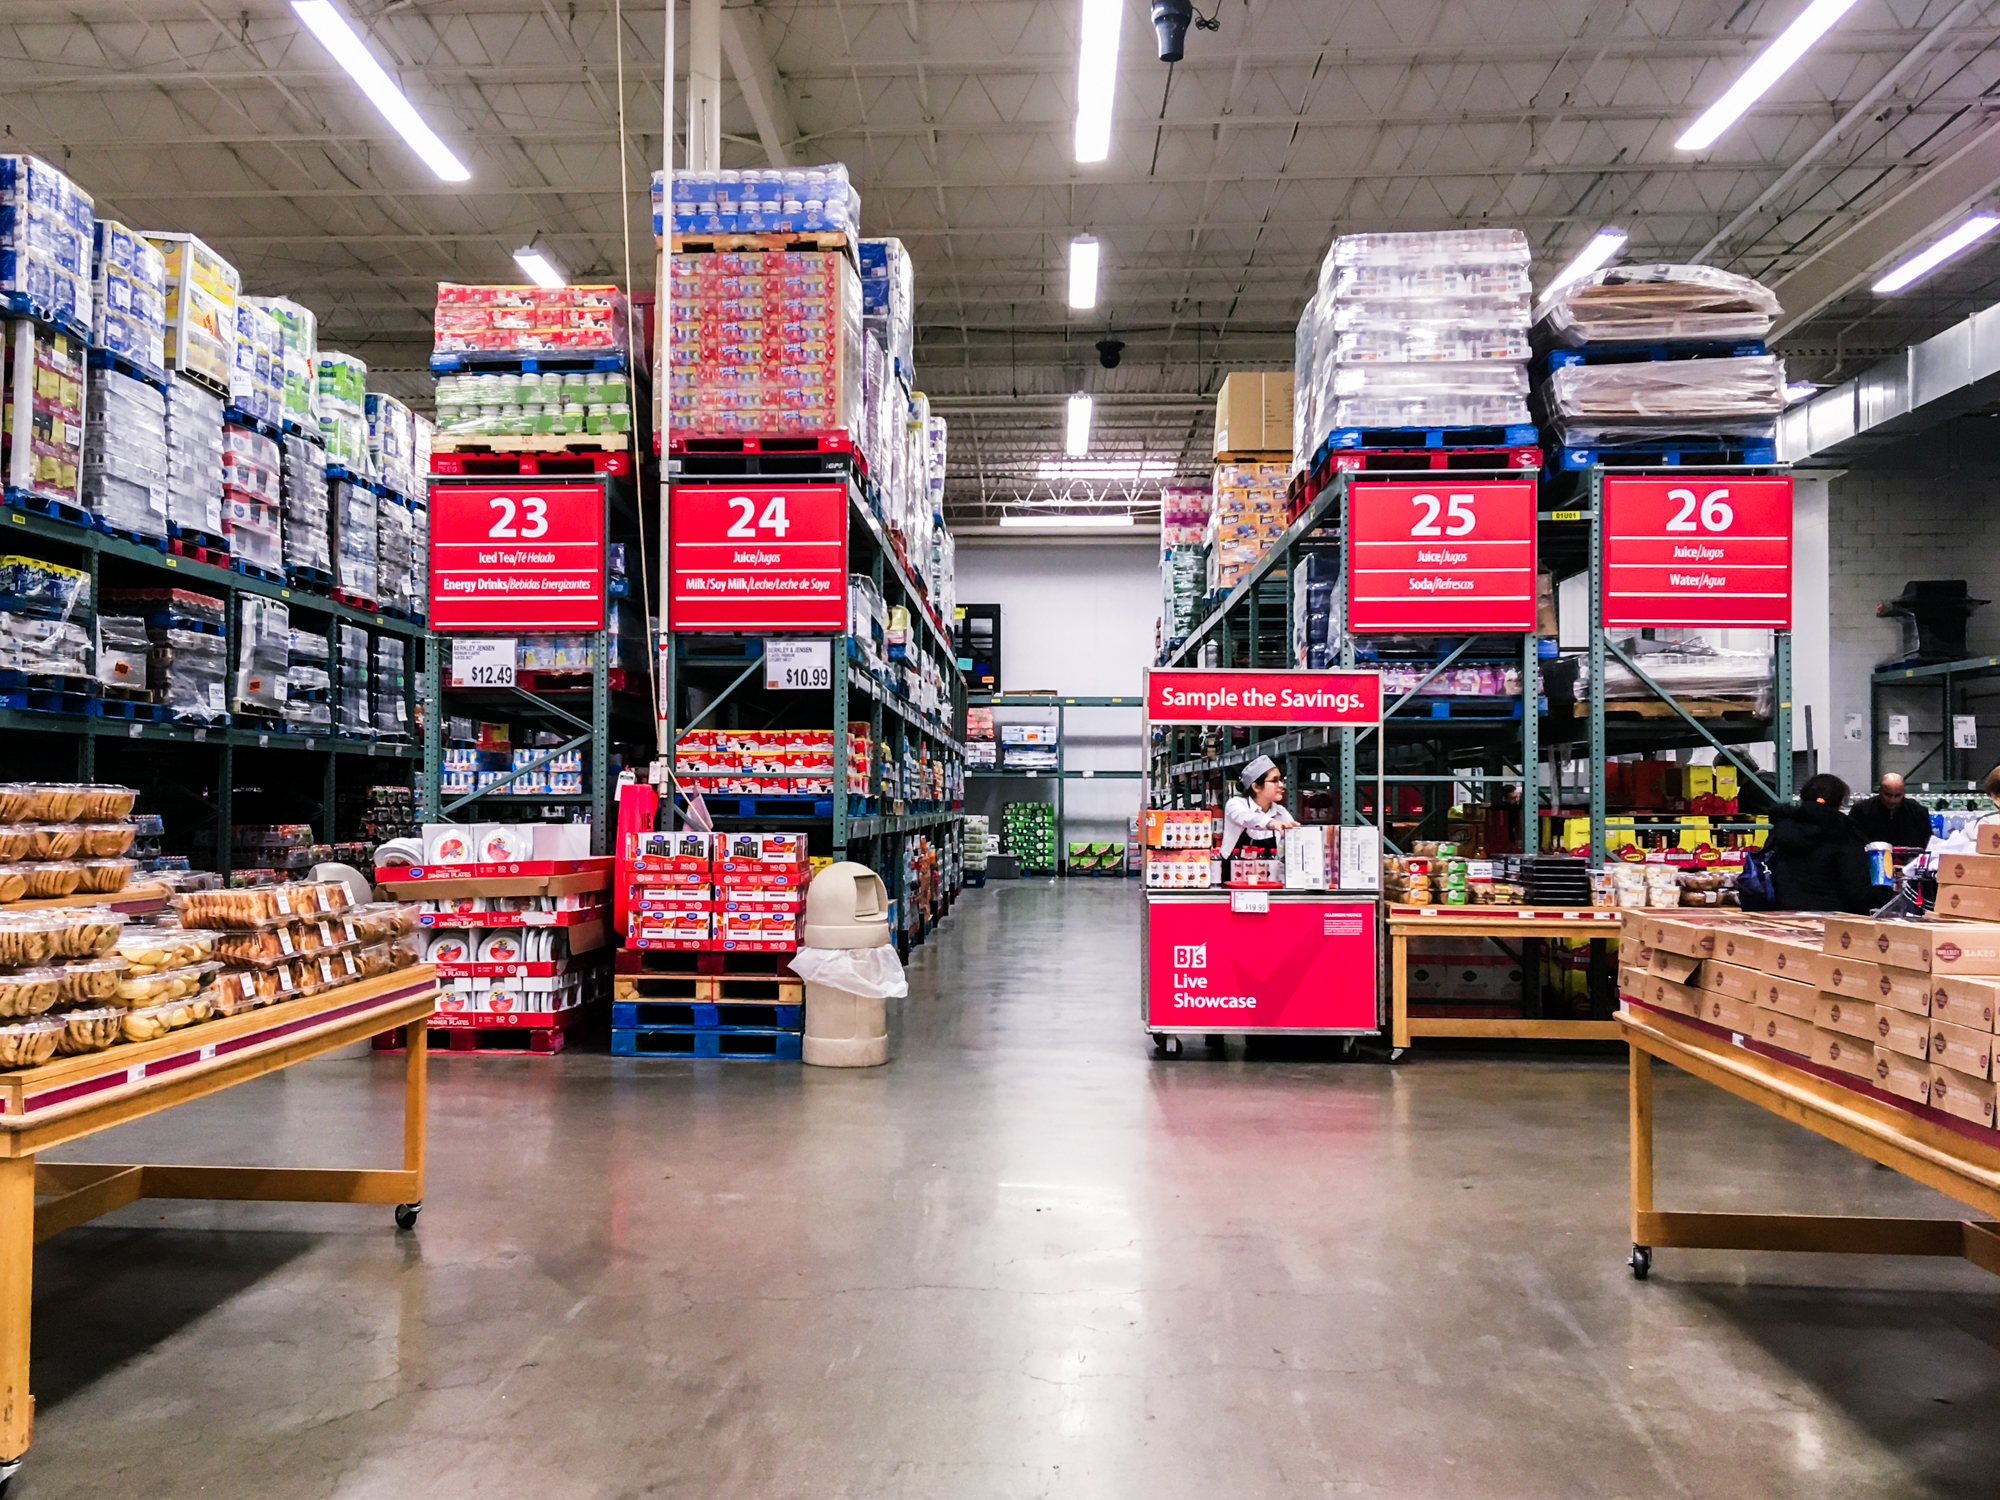 Customers shop BJ's like a supermarket, and it reflects an advantage Costco  should be worried about